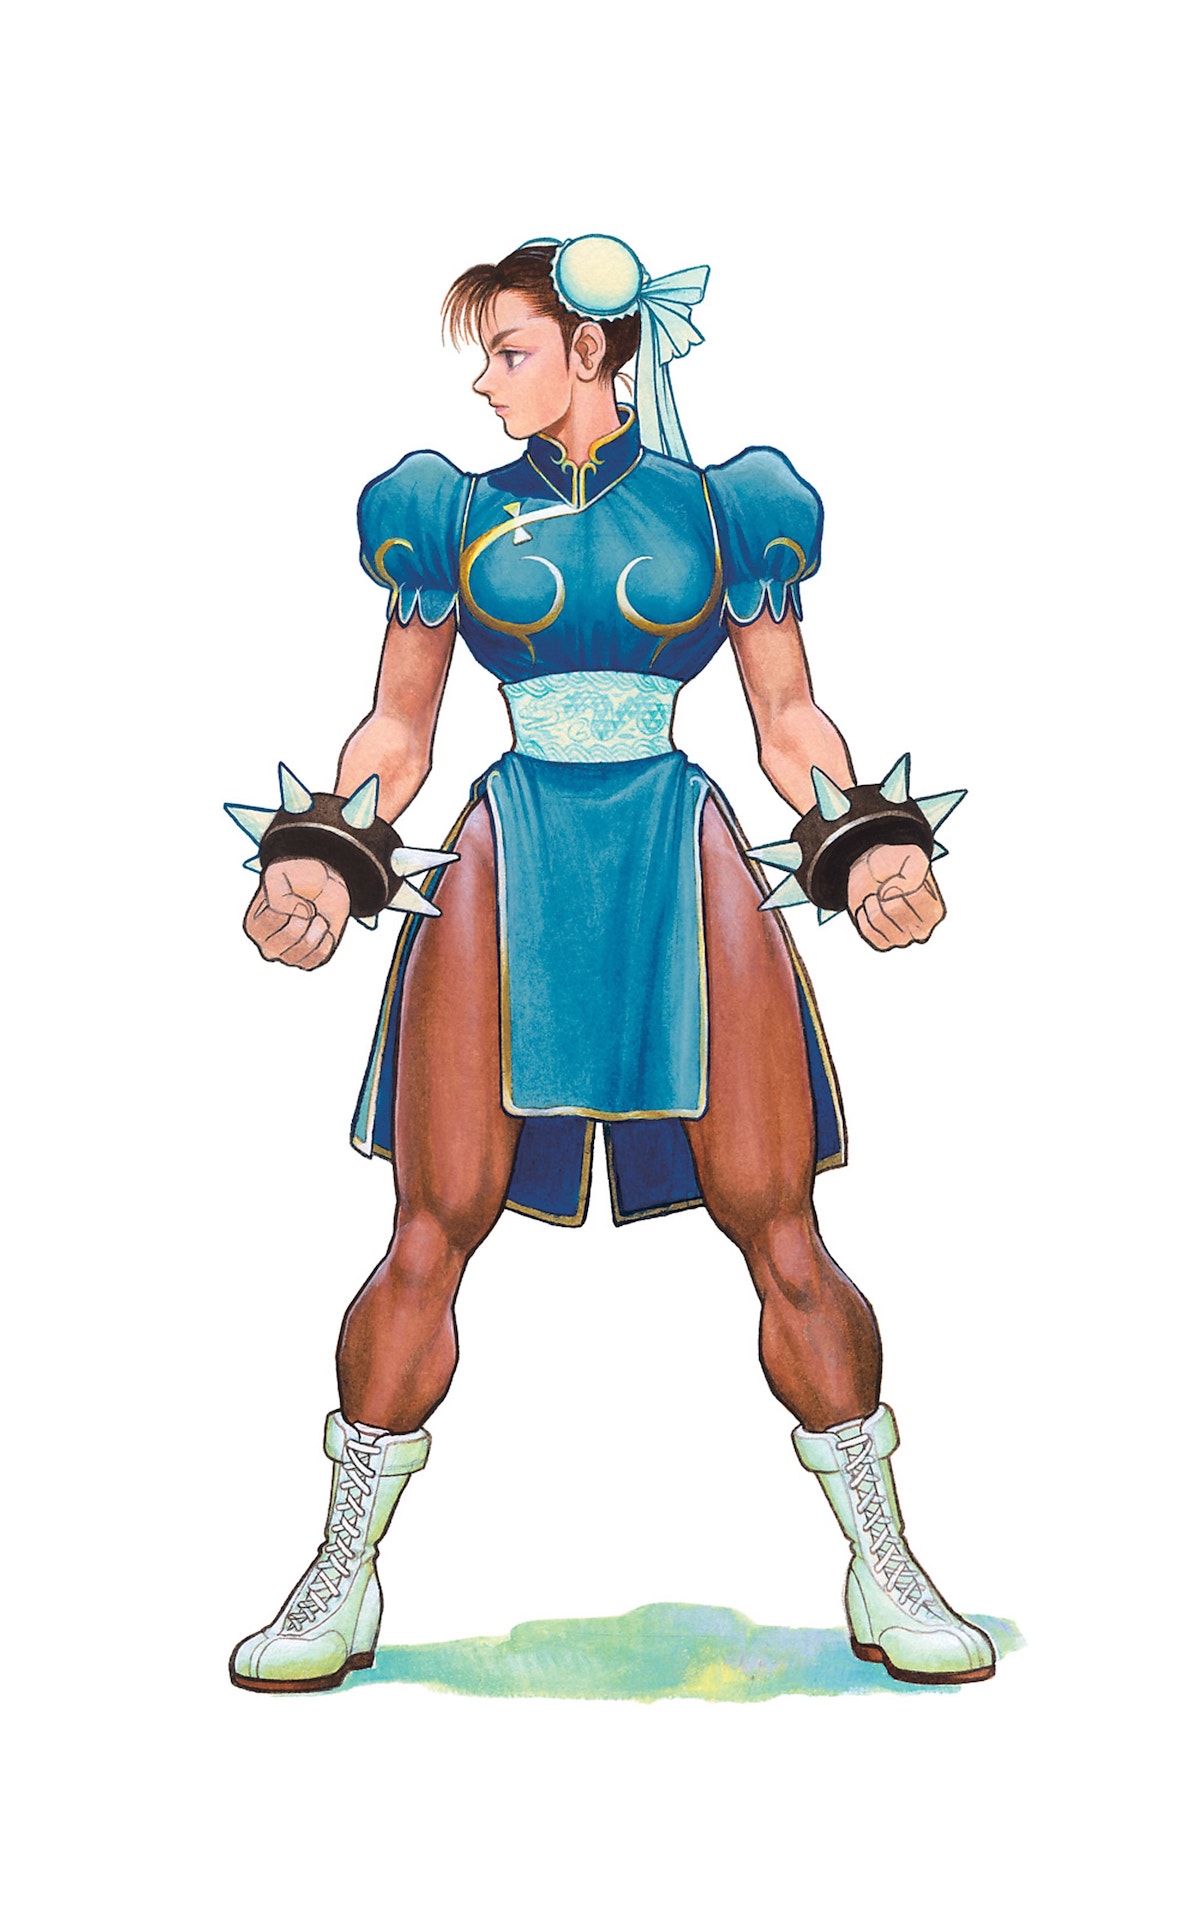 Official limited edition Chun-Li print for sale | Cook and Becker